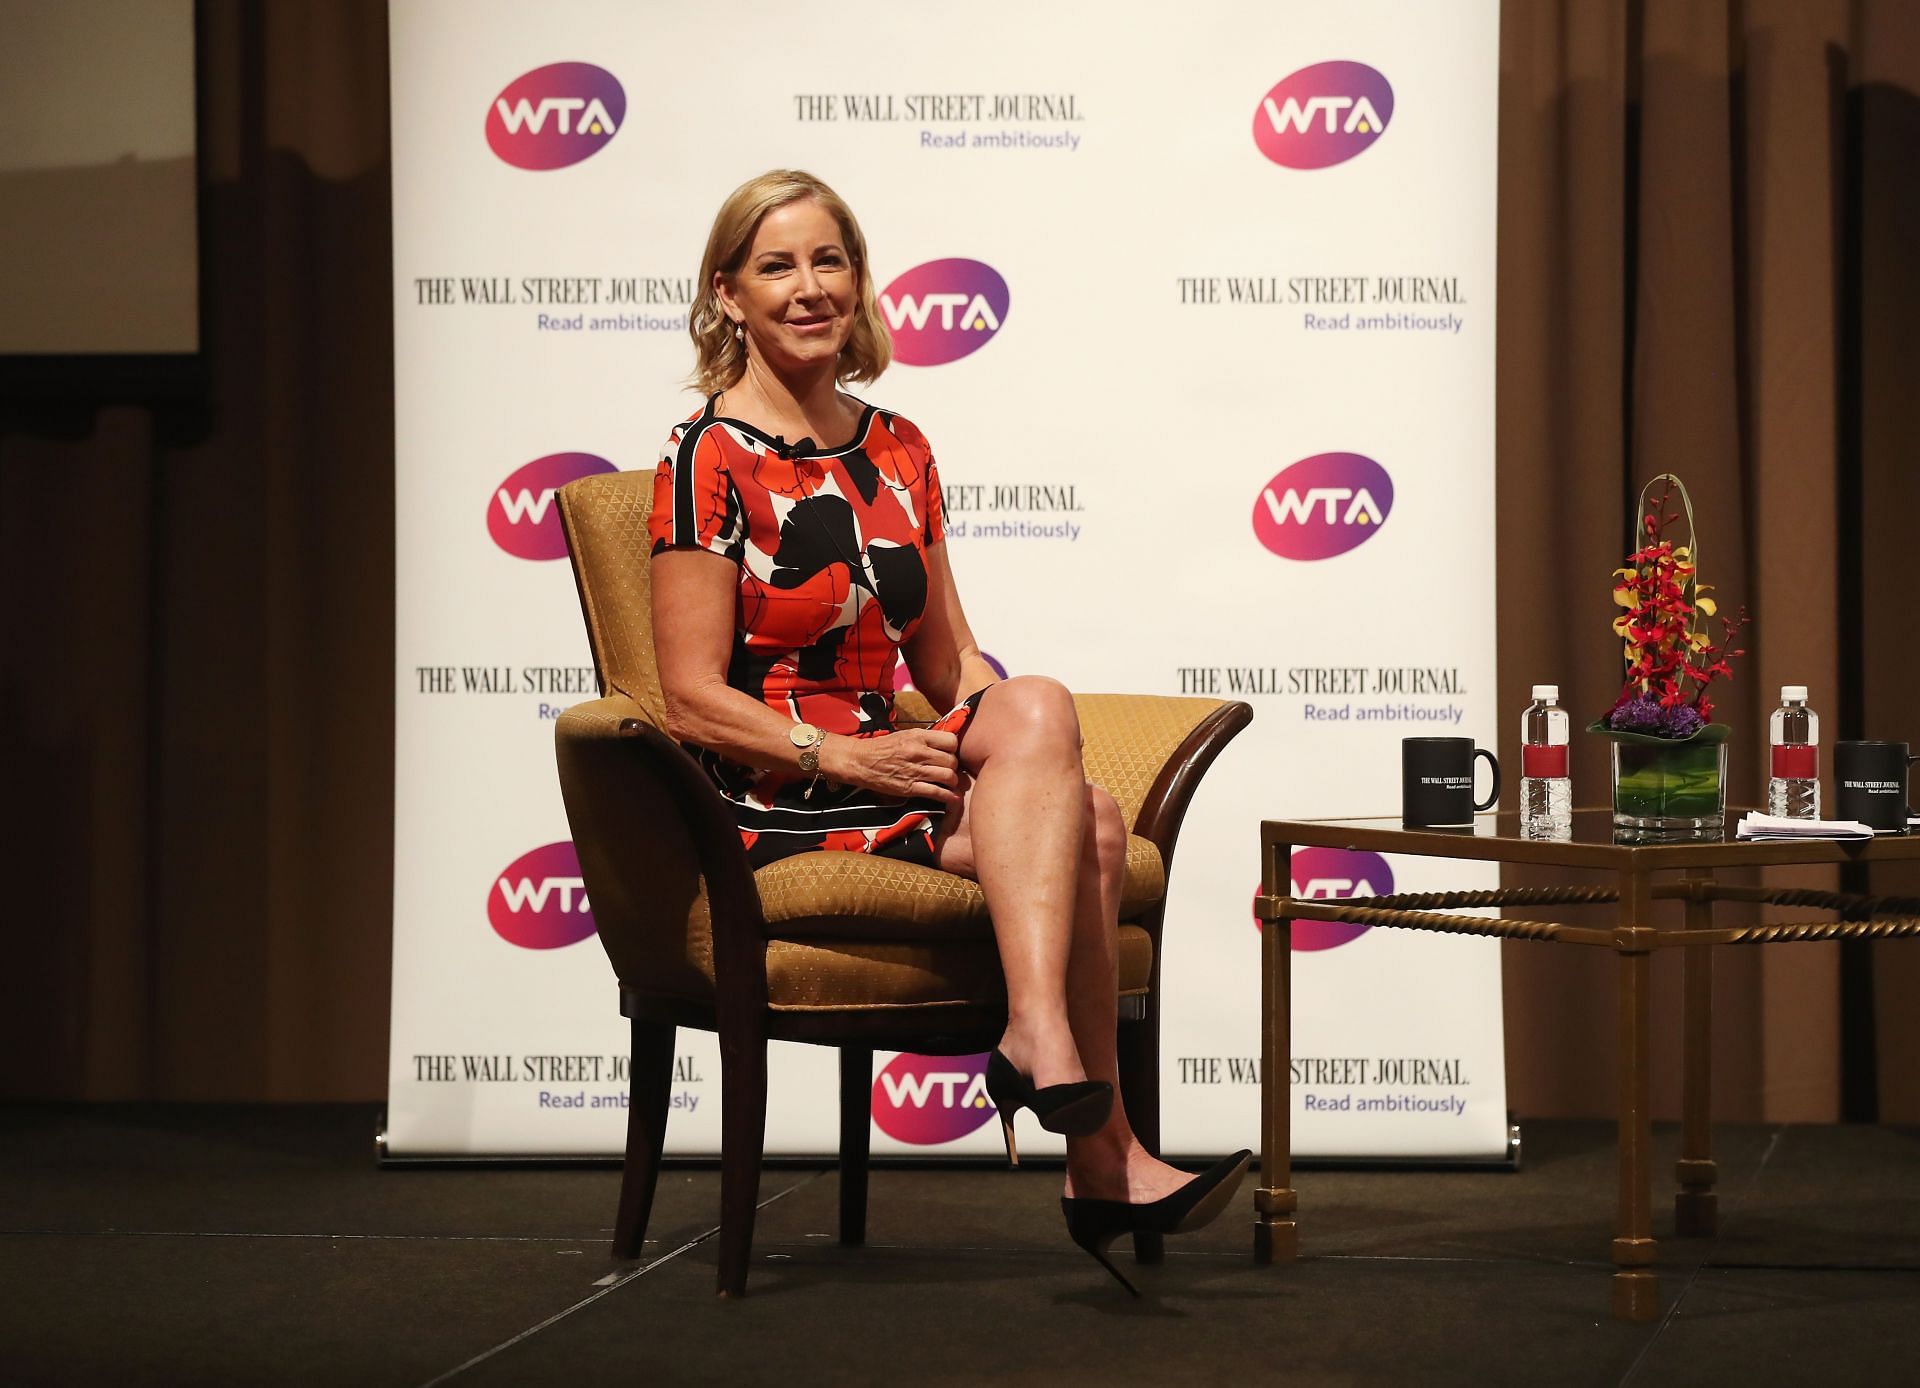 Chris Evert spoke about the price that has to be paid because of success due to a young age